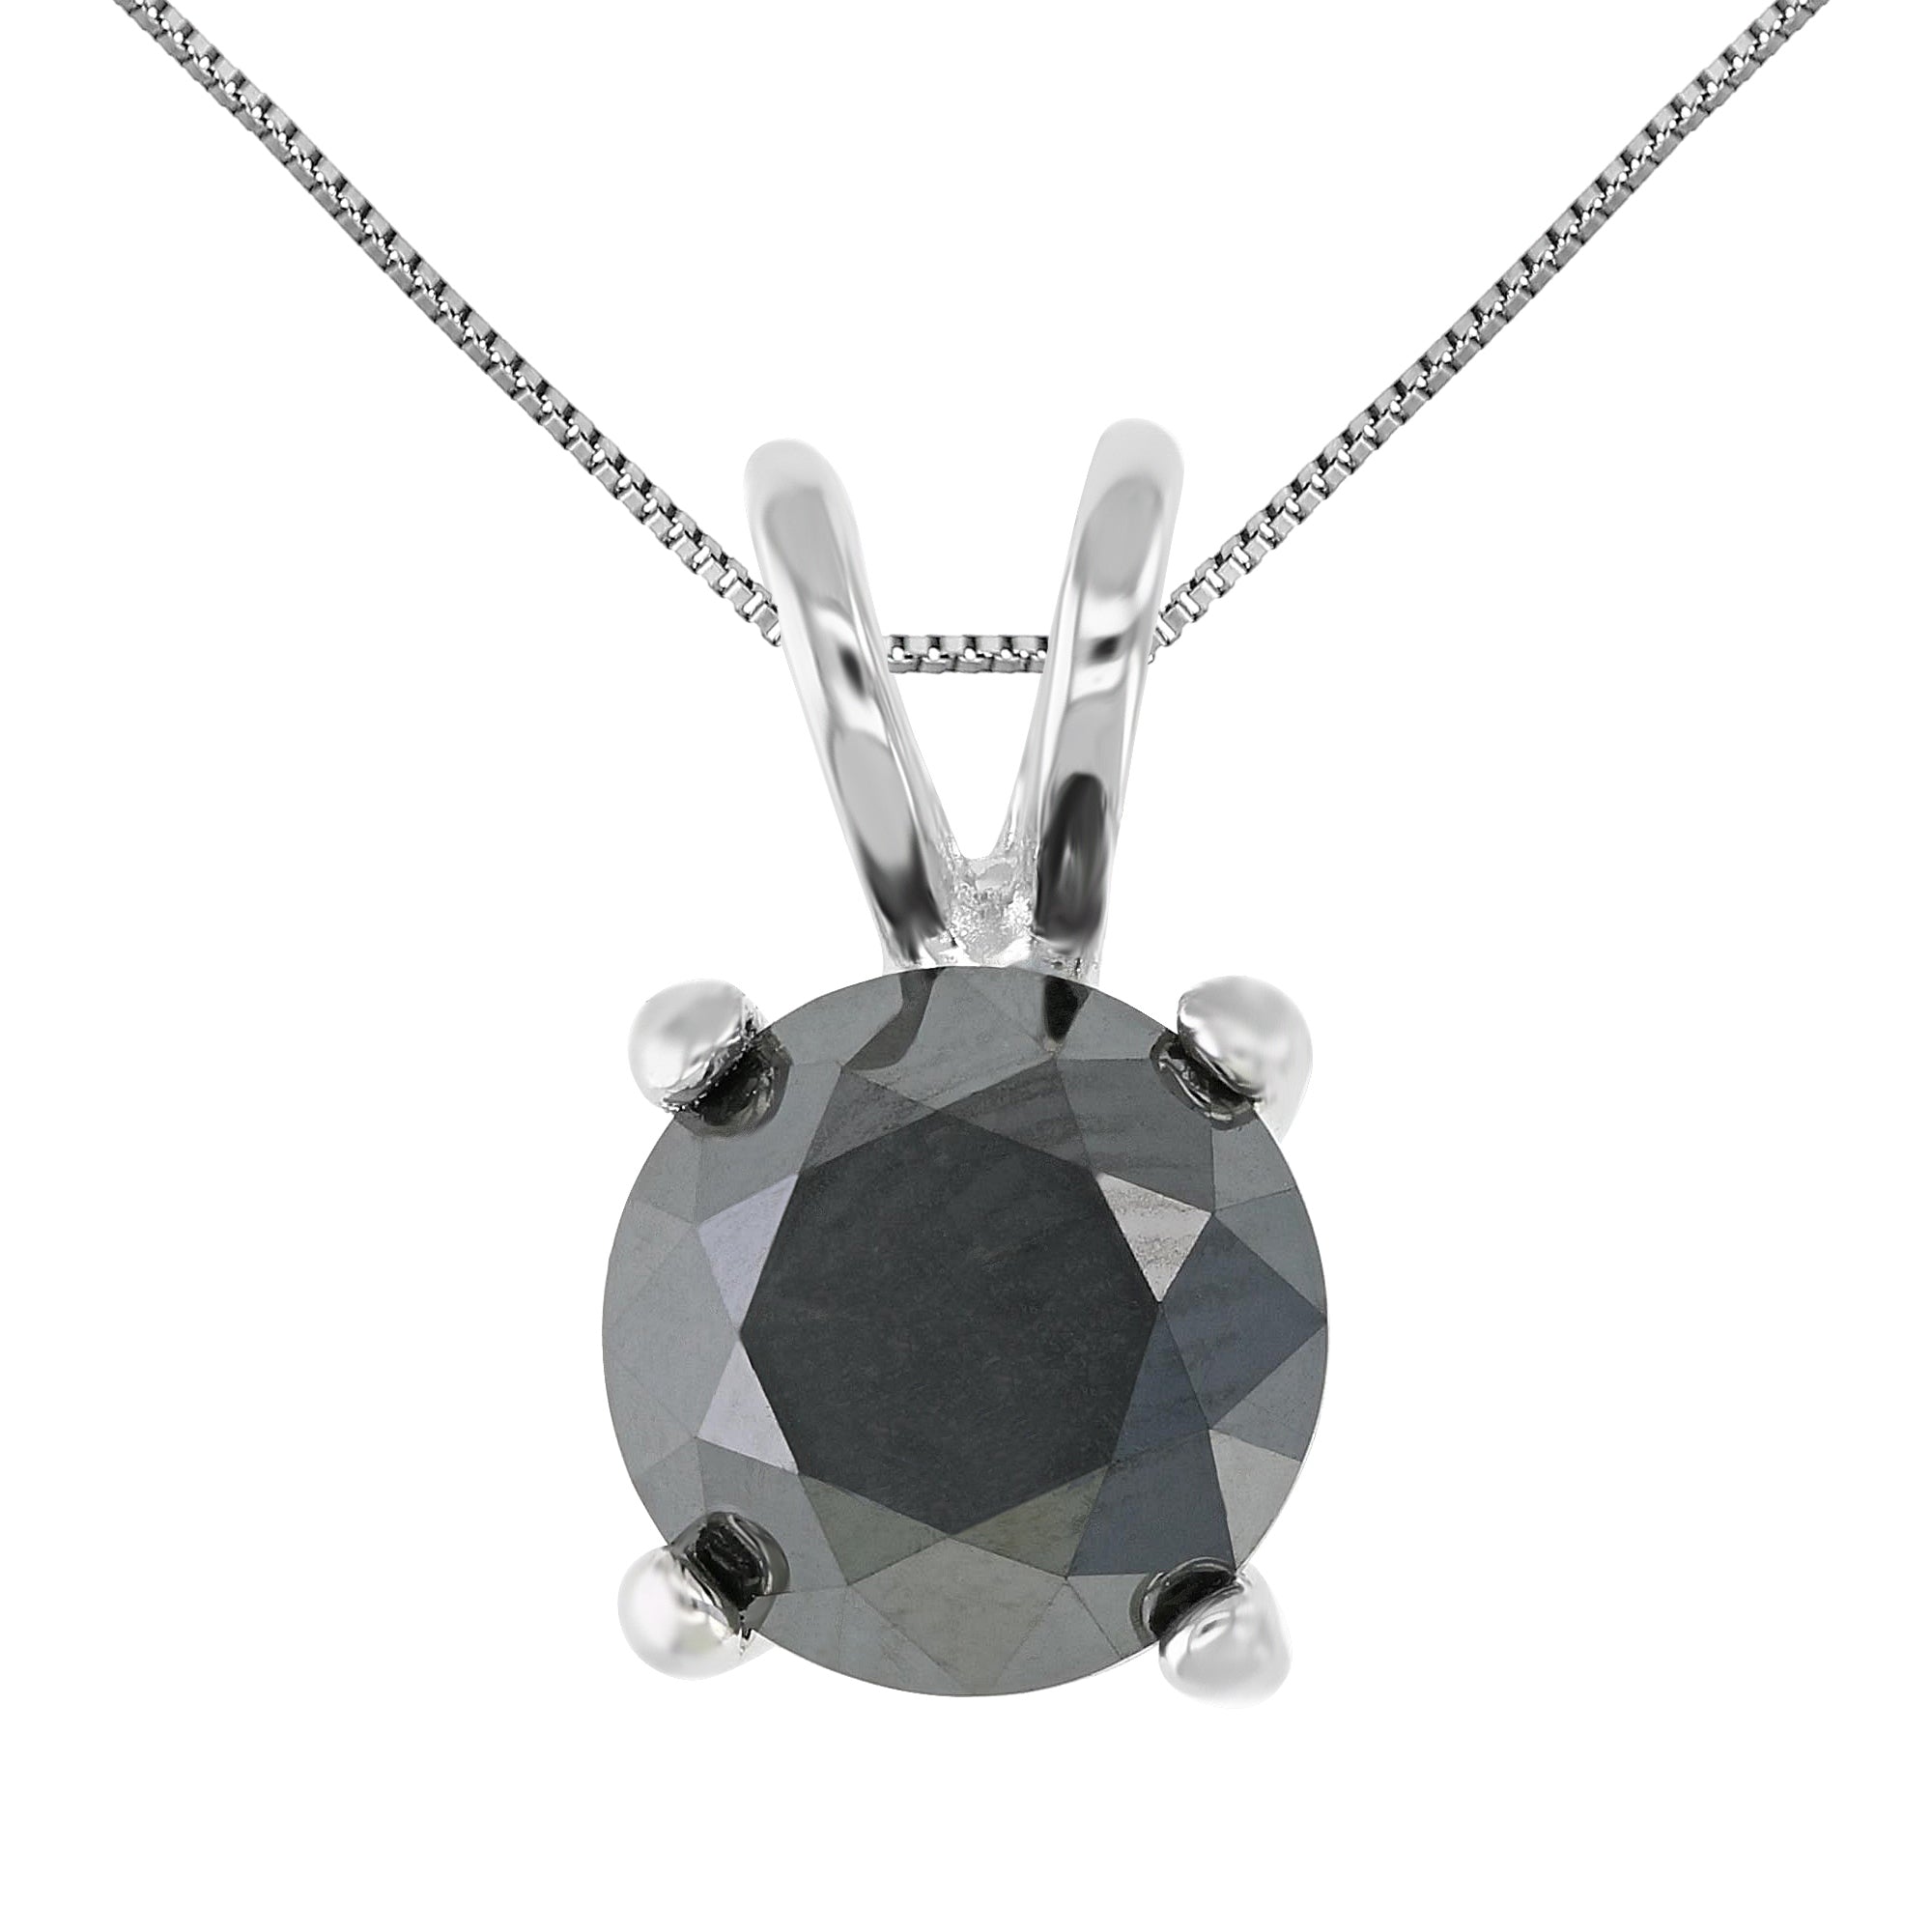 7.50 cttw Diamond Pendant, Black Diamond Solitaire Pendant Necklace for Women in .925 Sterling Silver with Rhodium, 18 Inch Chain, Prong Setting